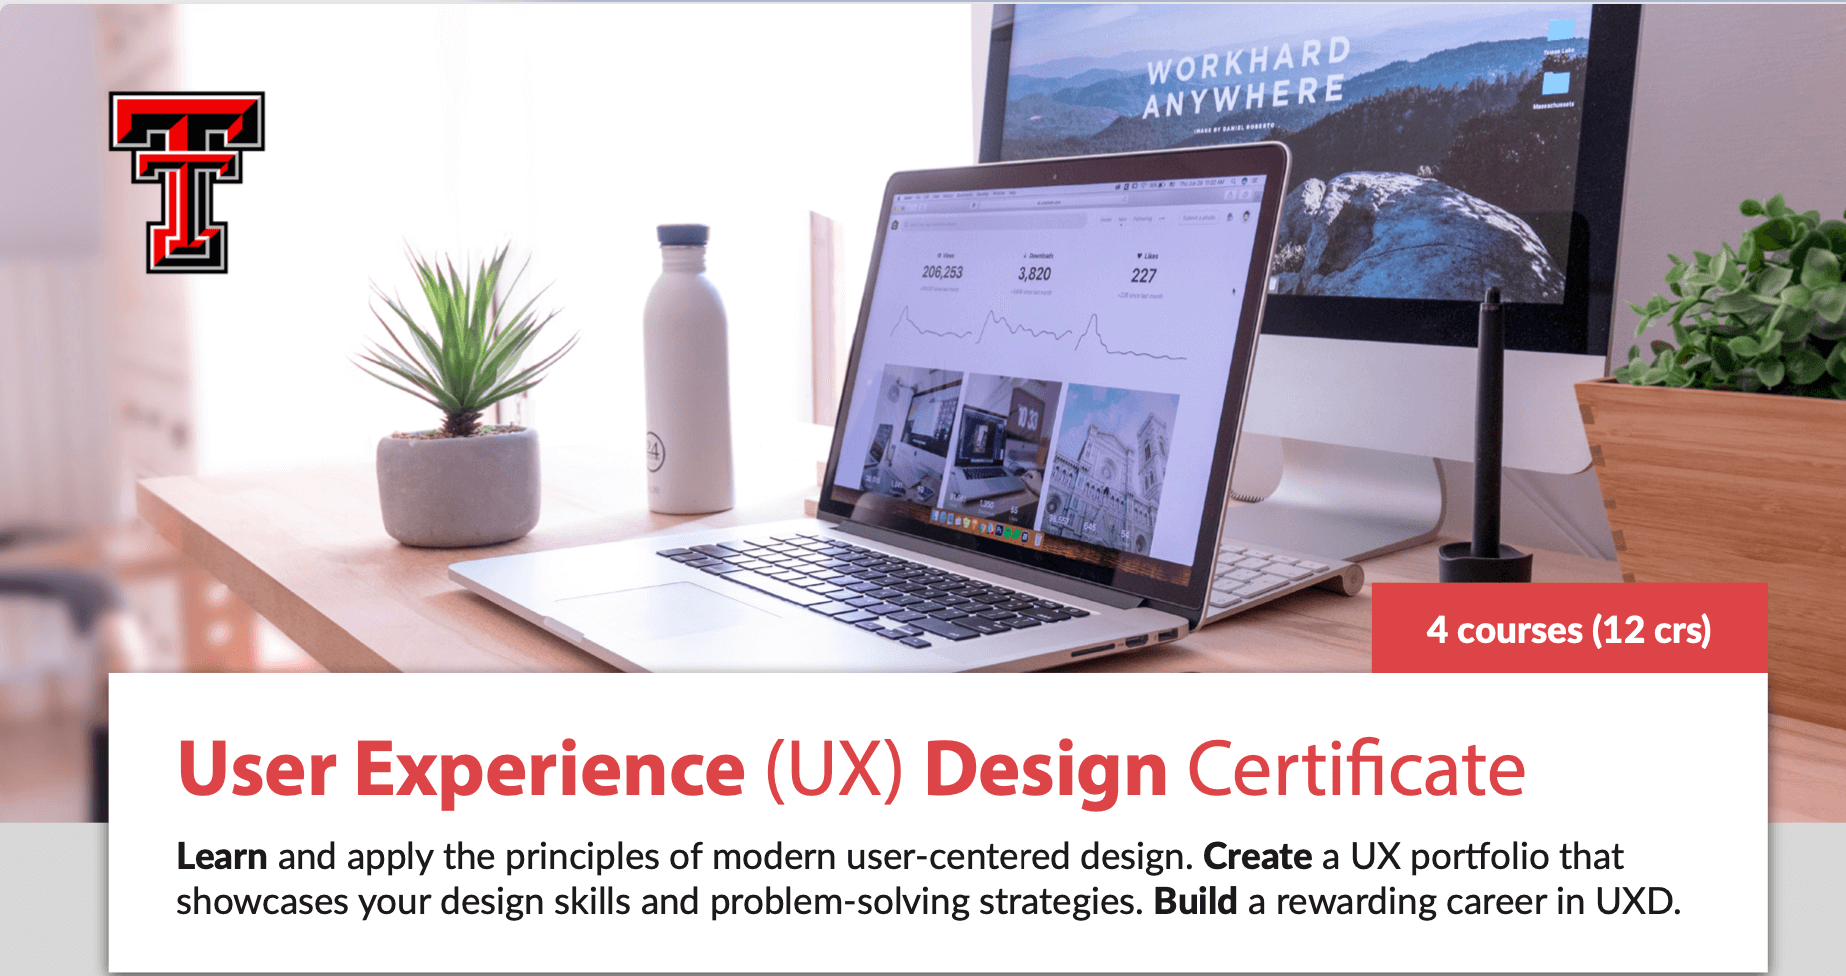 User experience (UX) design is a growing interdisciplinary field across psychology, industrial engineering, computer science, and other technology sectors. As per the 2021 CNN Money, the high industry demands for UX designers is expected to grow by 19% between 2017-2027. Click the link for more details!